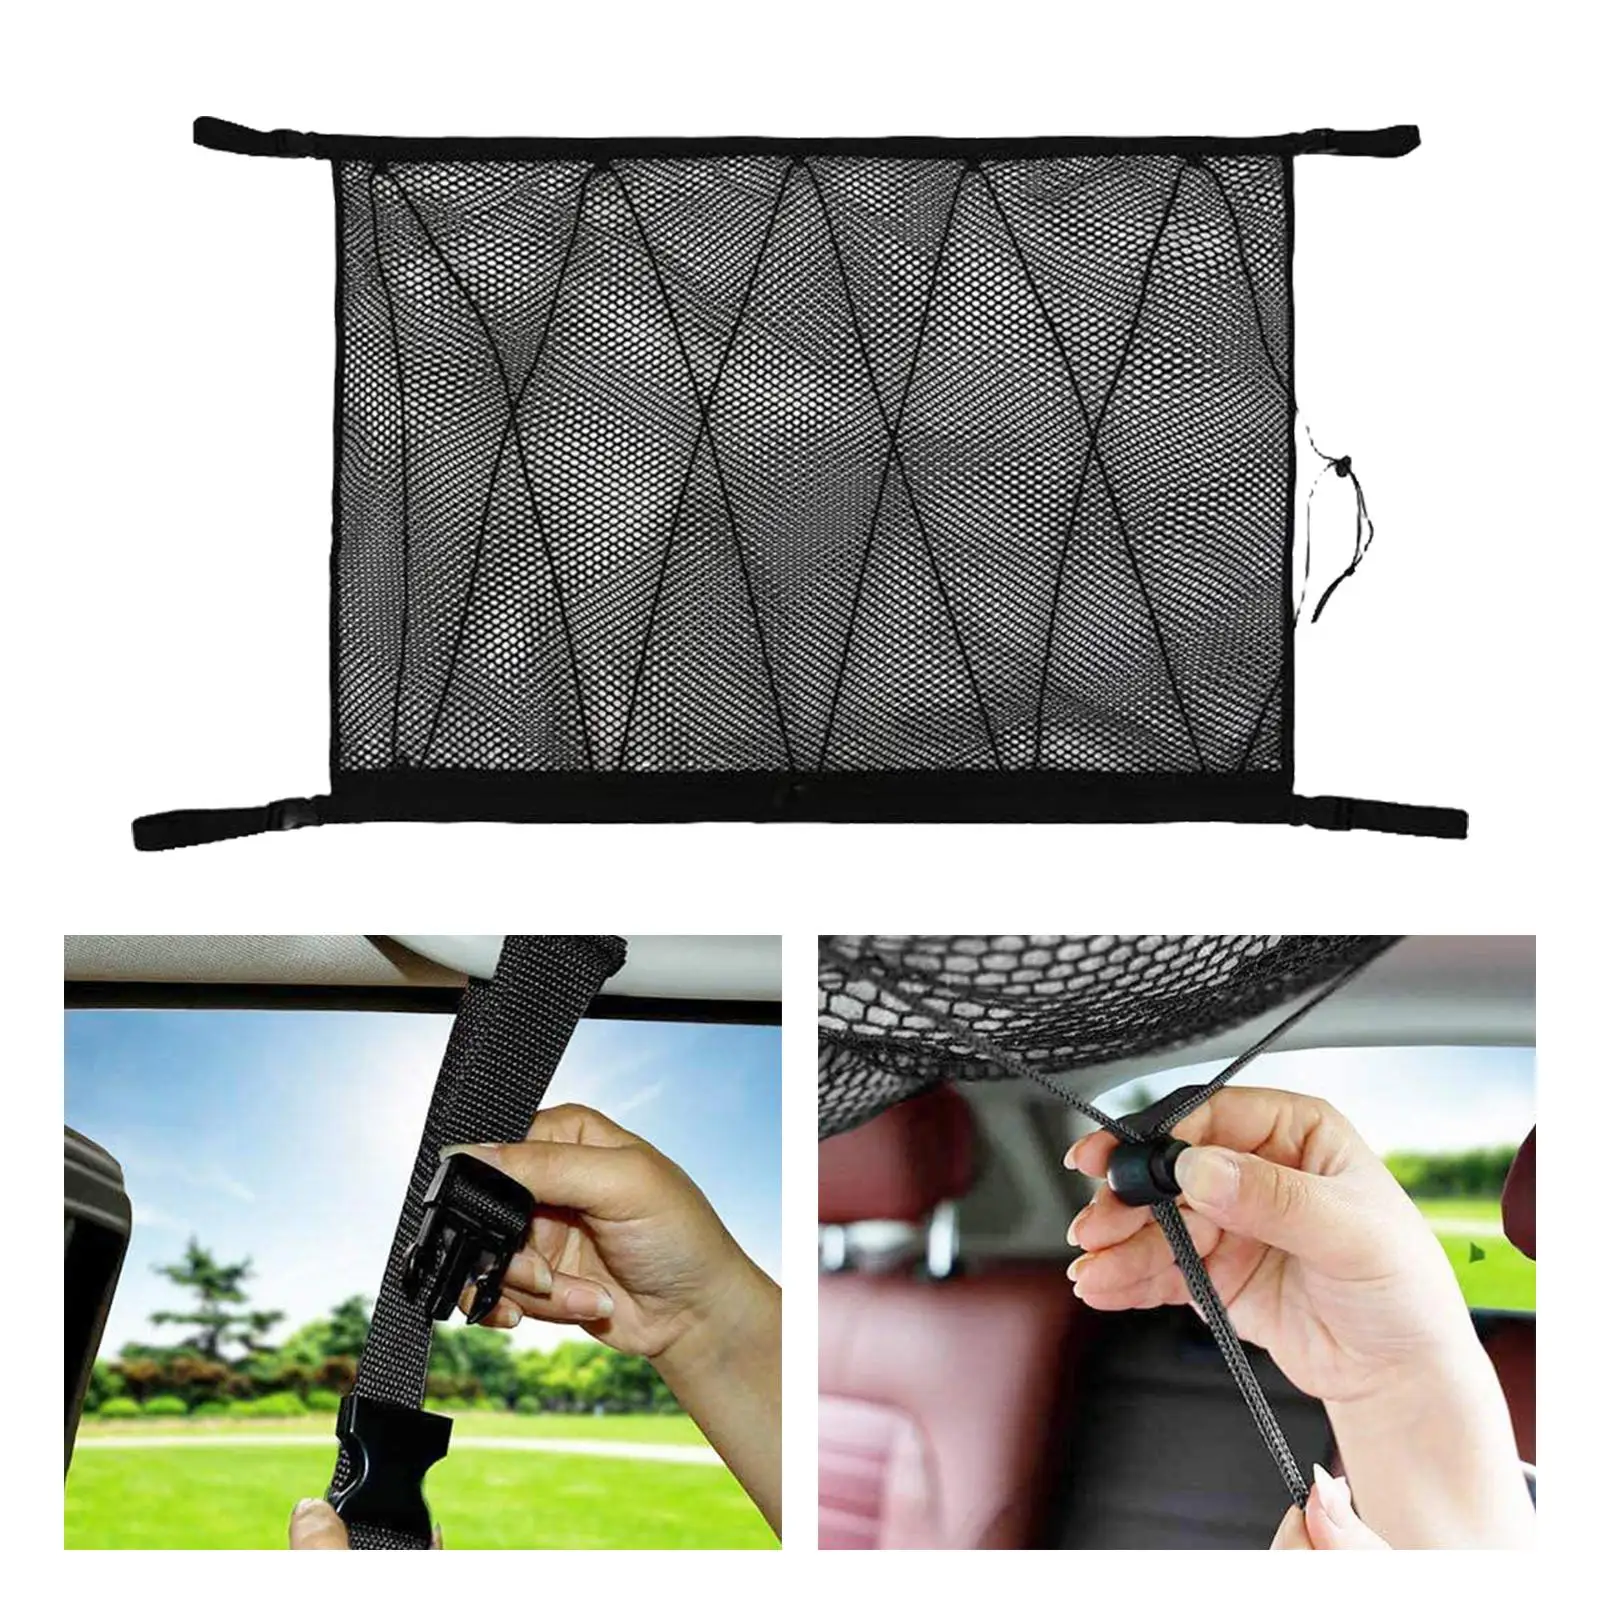 Car Ceiling Cargo Pocket with Zipper Adjustable for Quilt Camping